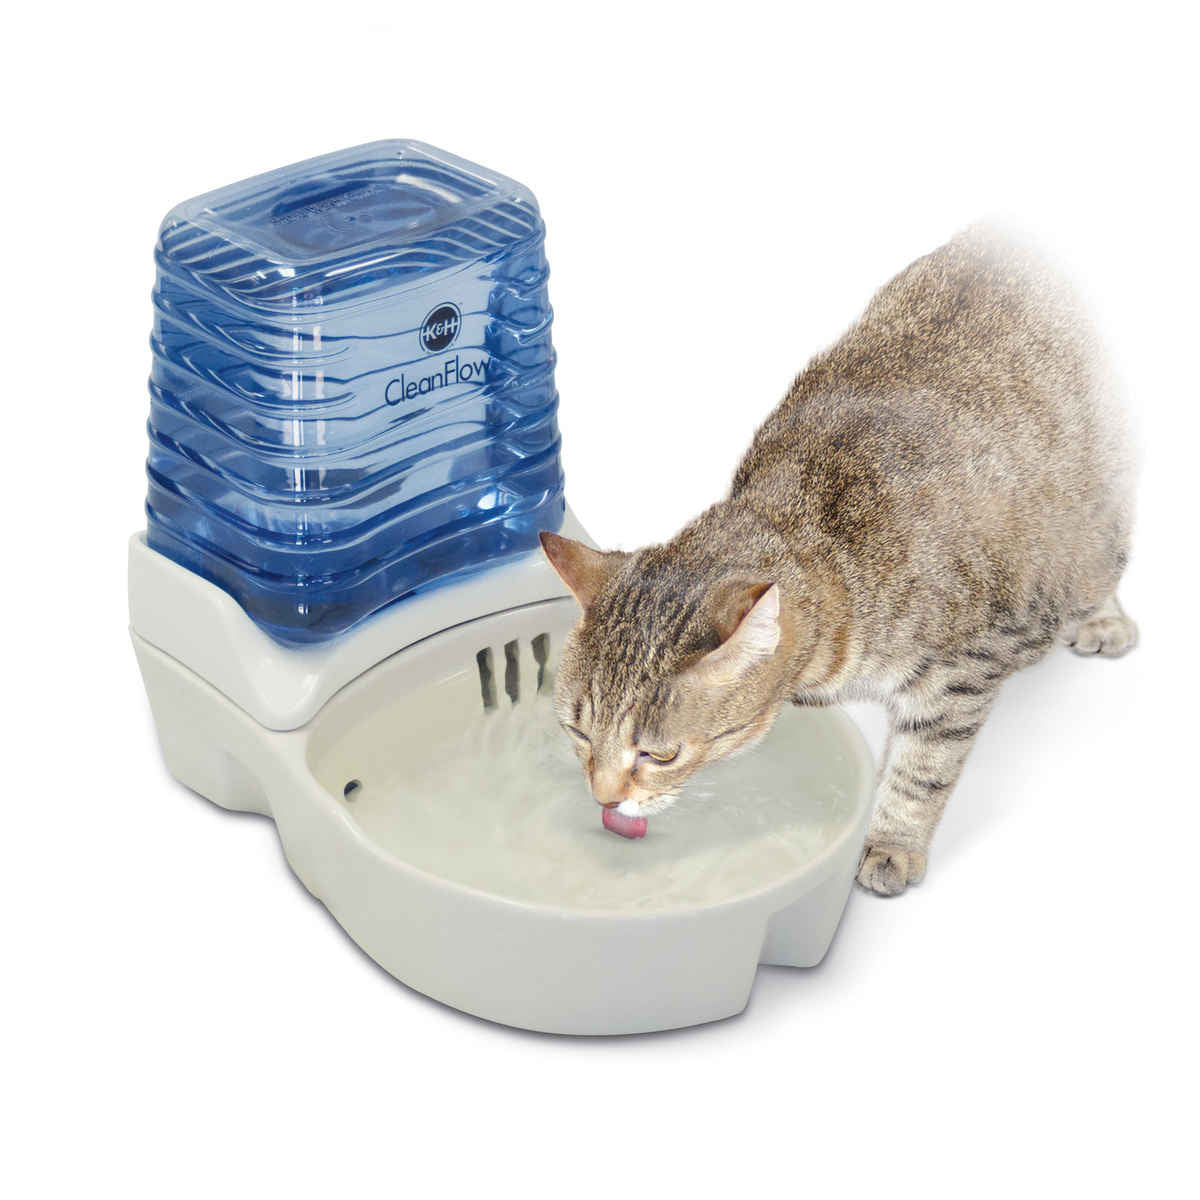 K&h Pet Products Kh2571 Cleanflow Cat Ceramic Fountain With Reservoir 170 Oz.